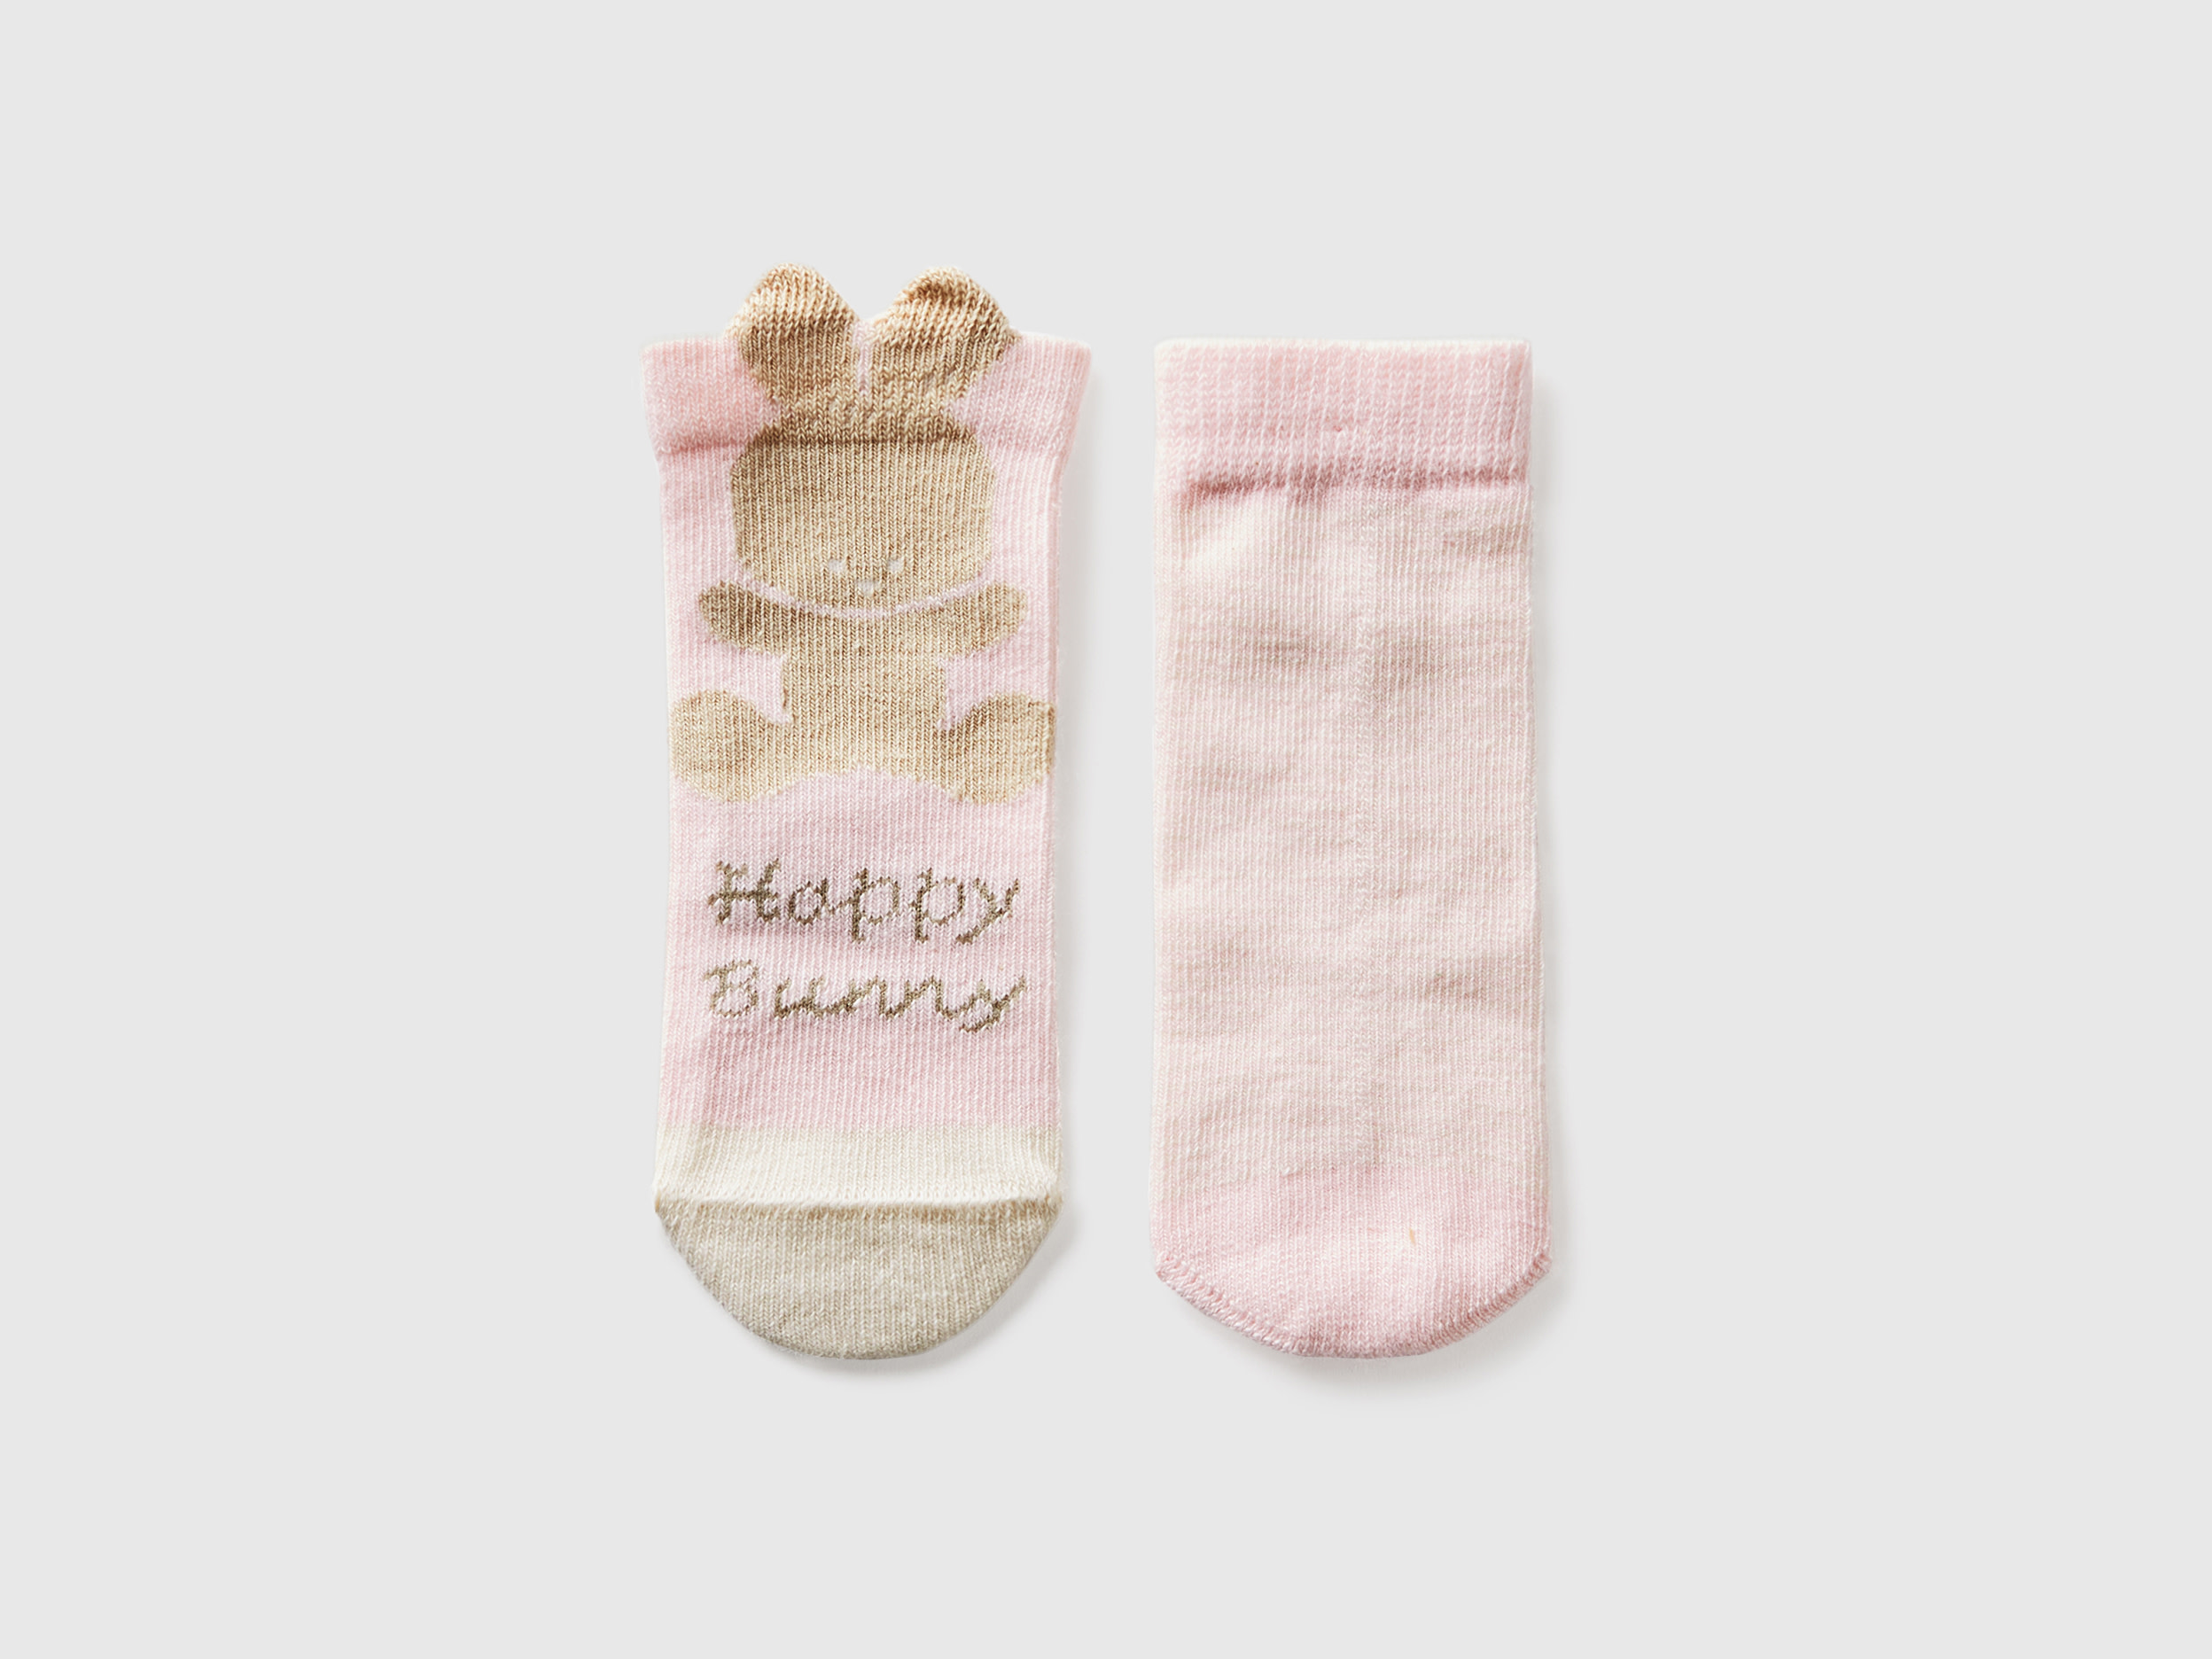 Benetton, Sock Set With Stripes And Bunny, size 6-12, Pink, Kids